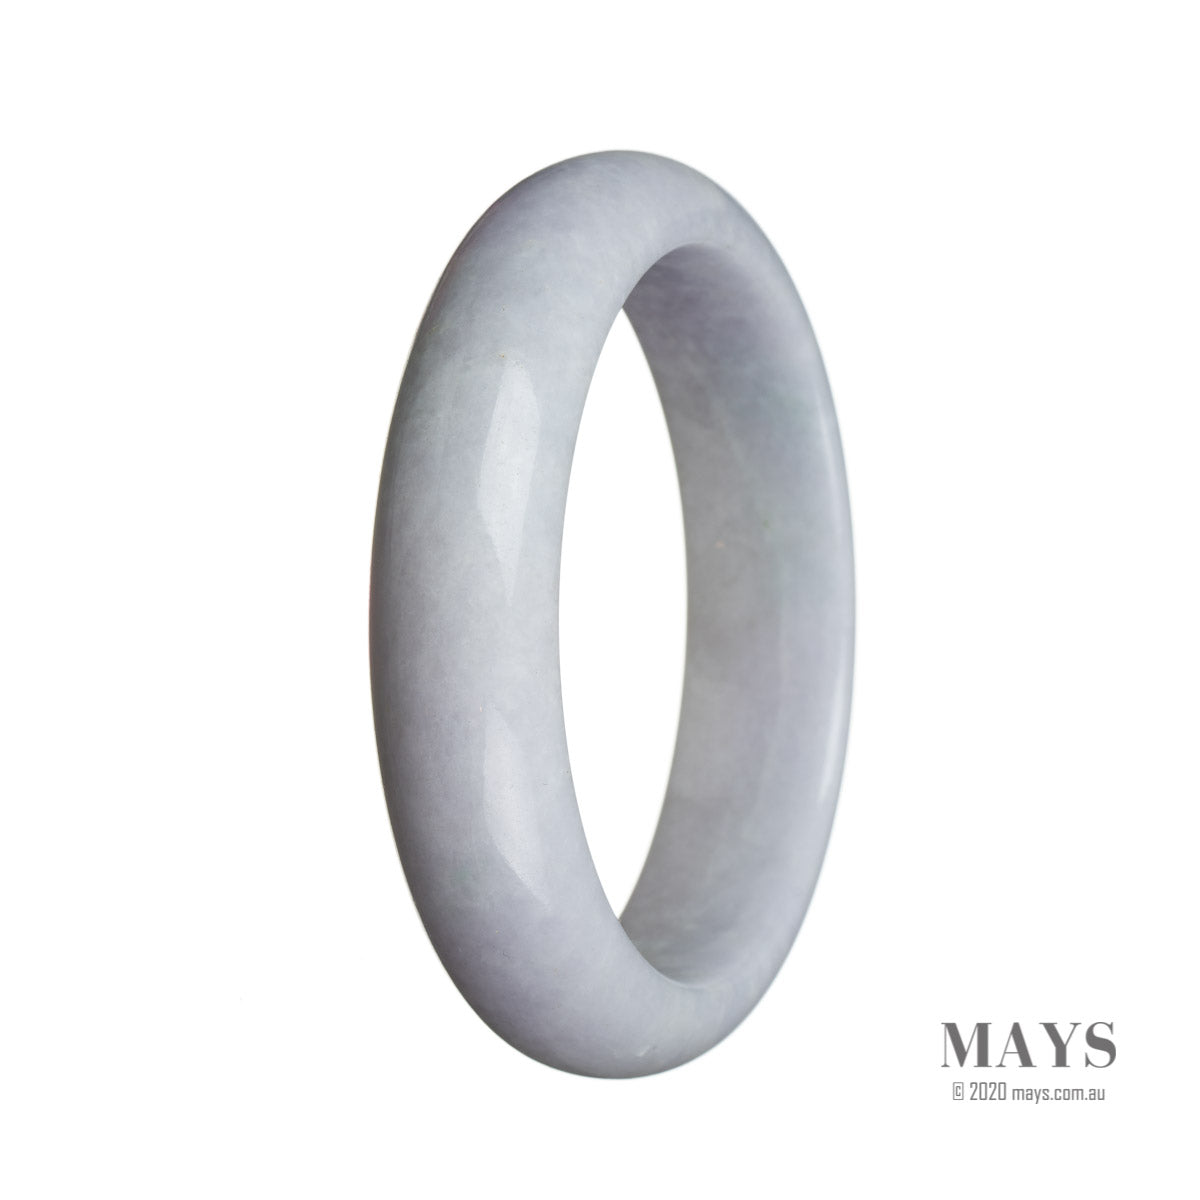 A genuine pale lavender Burma Jade bangle with a half moon shape, measuring 59mm. Perfect for adding a touch of elegance to your outfit. By MAYS™.